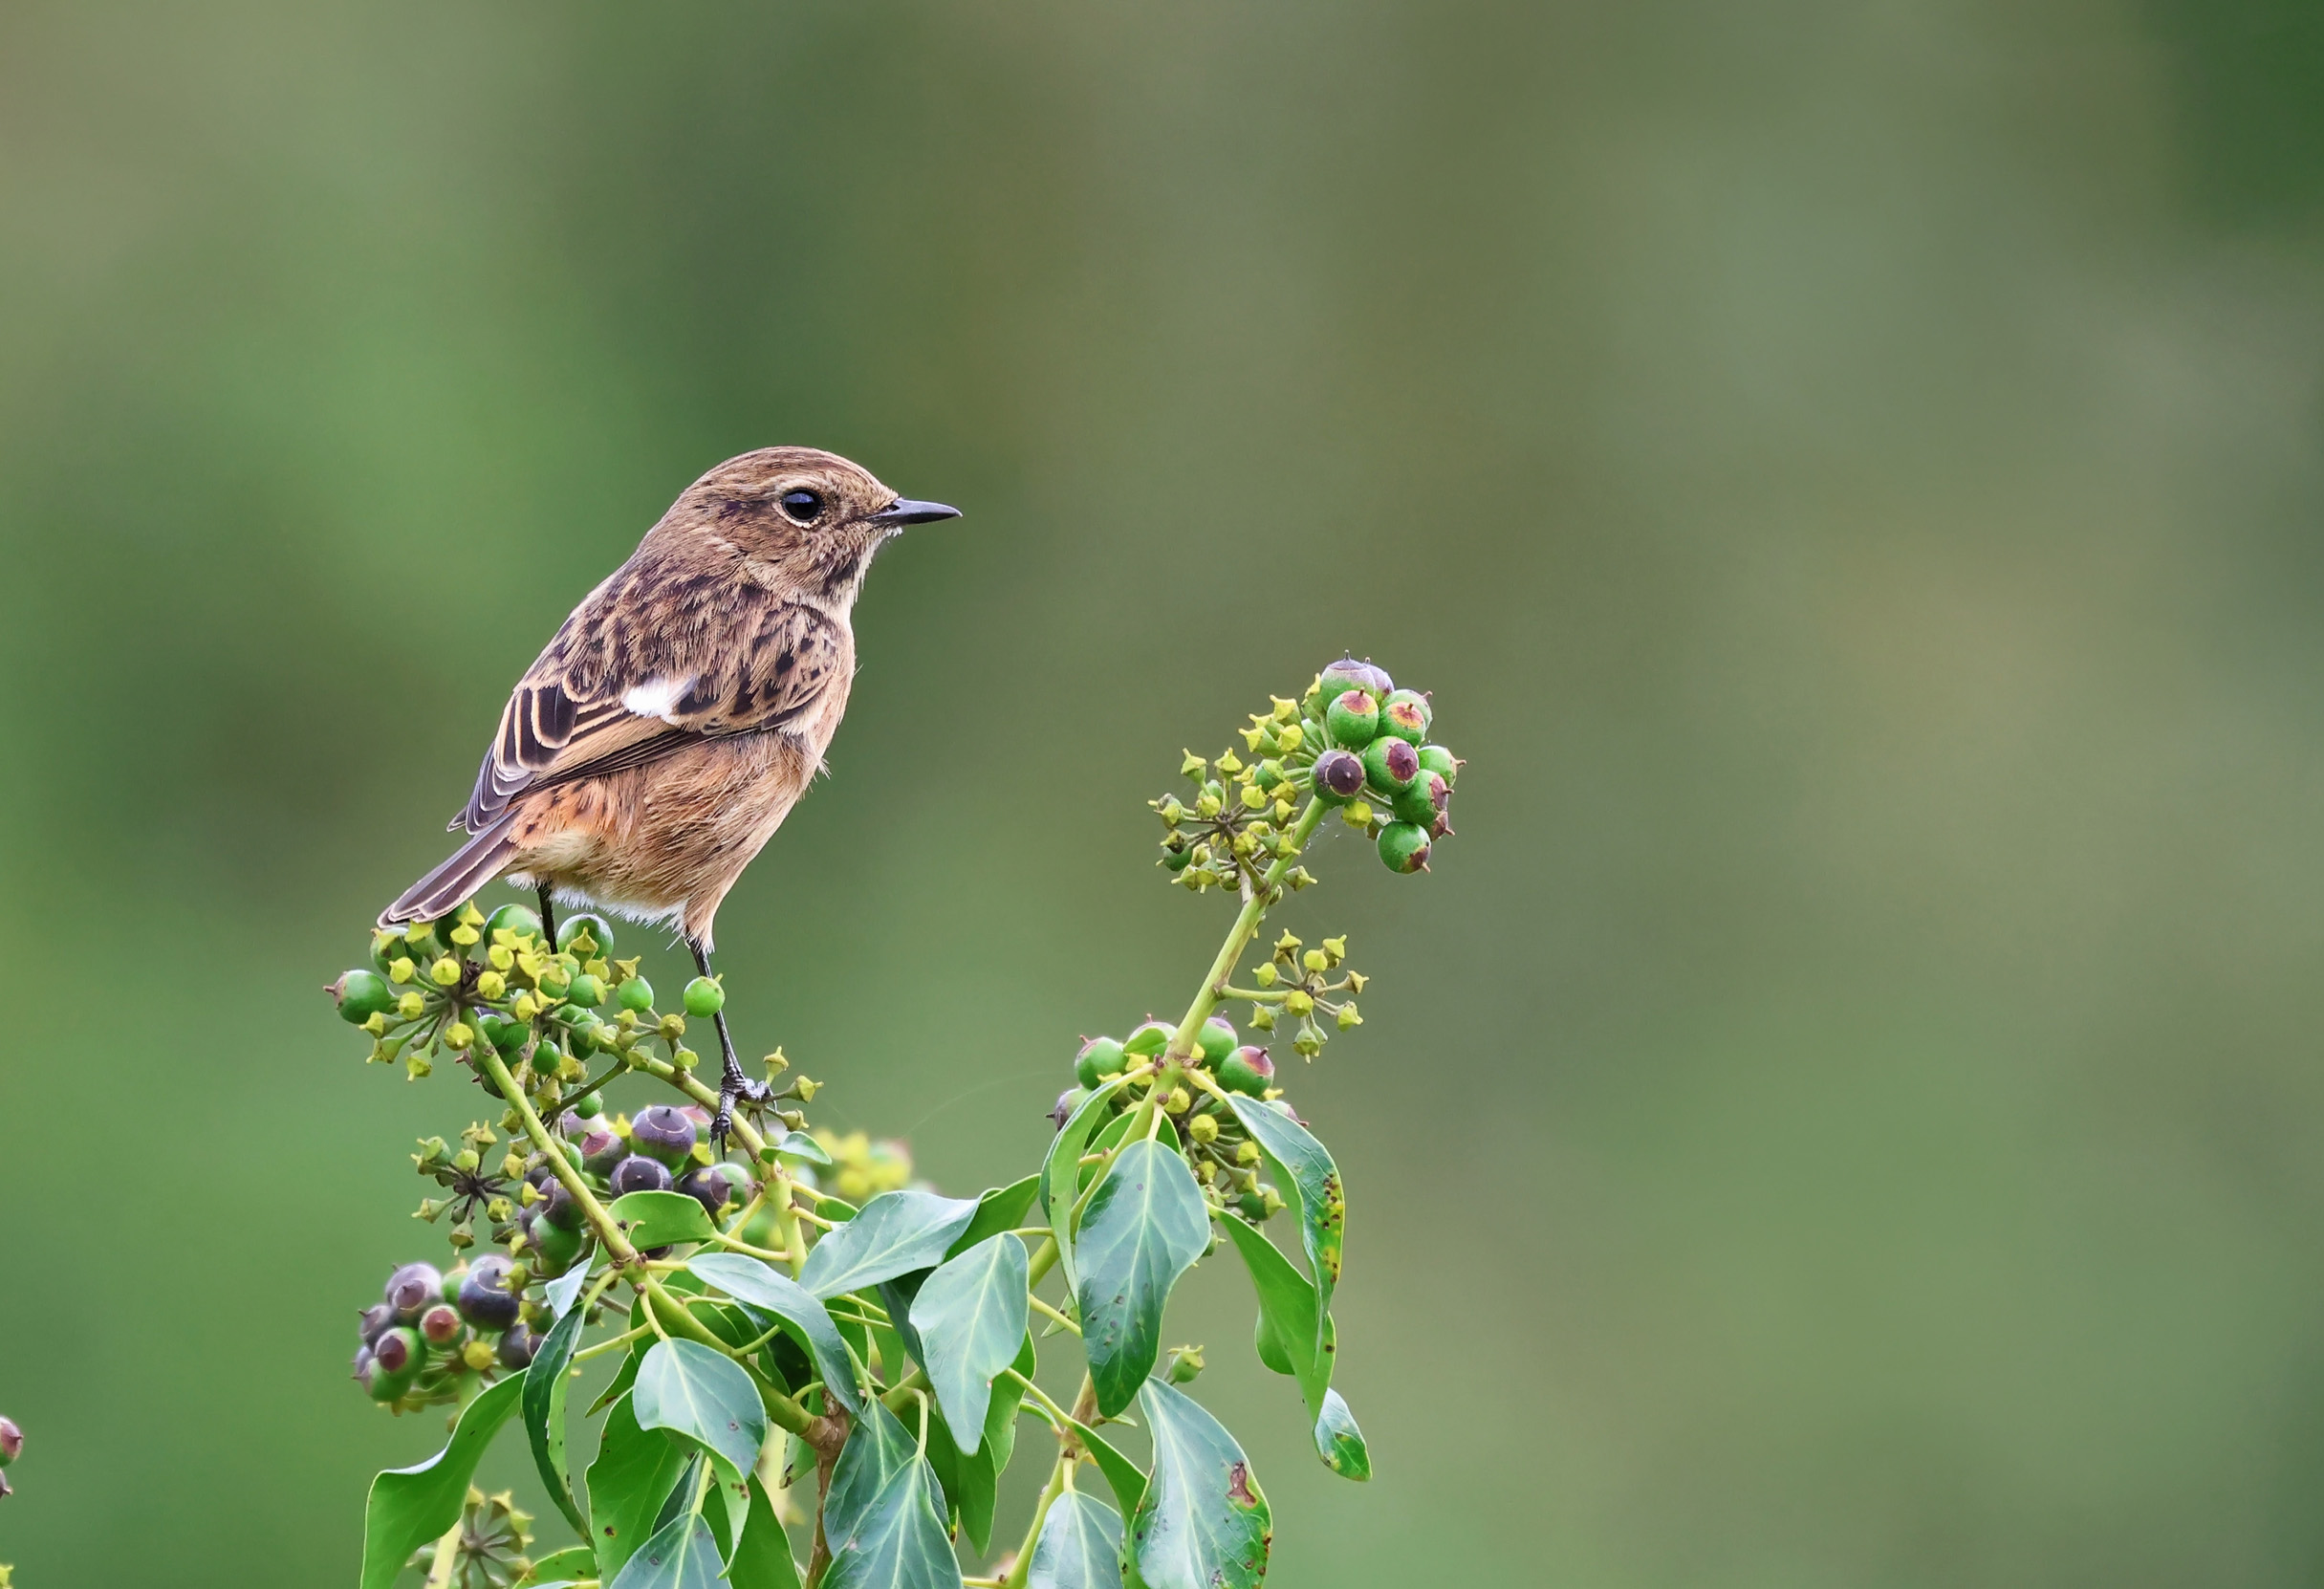 Lone female Stonechat stood on a branch filled with leaves.